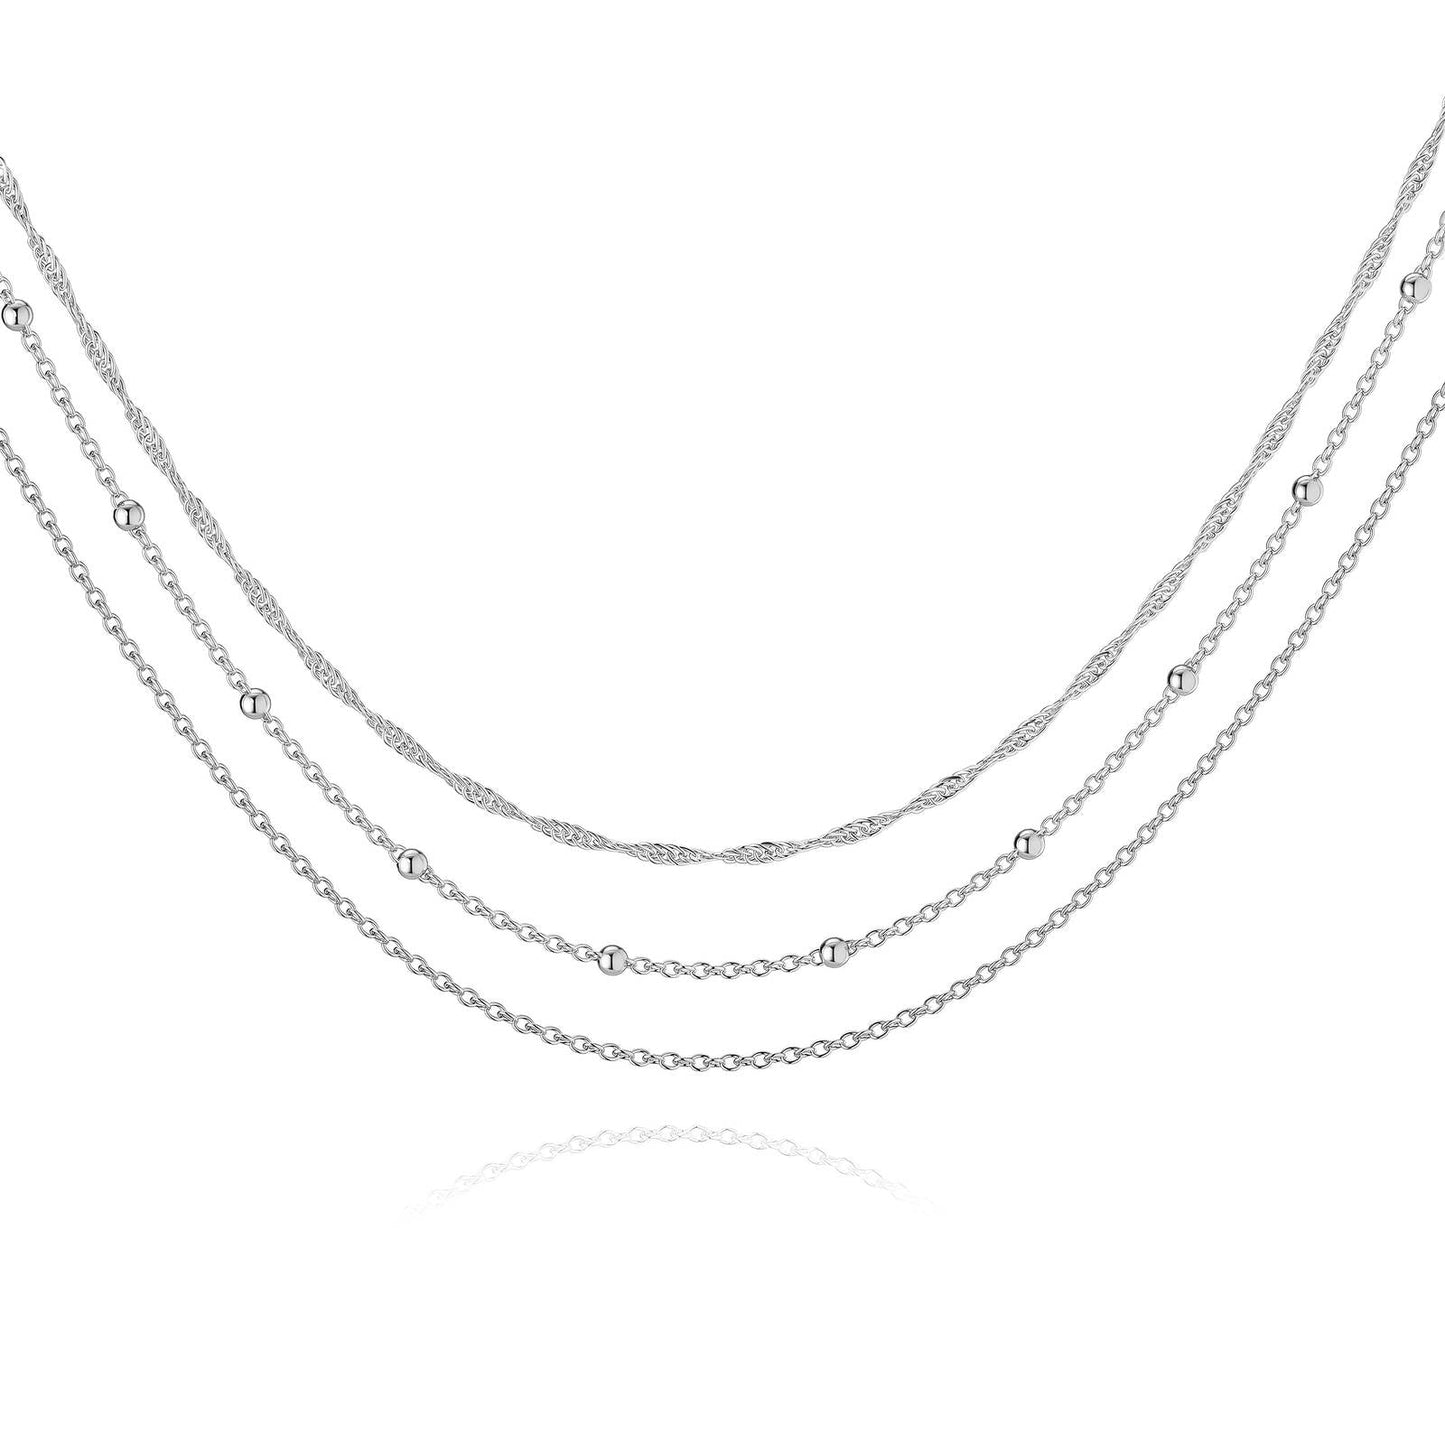 Three tiers of silver necklace